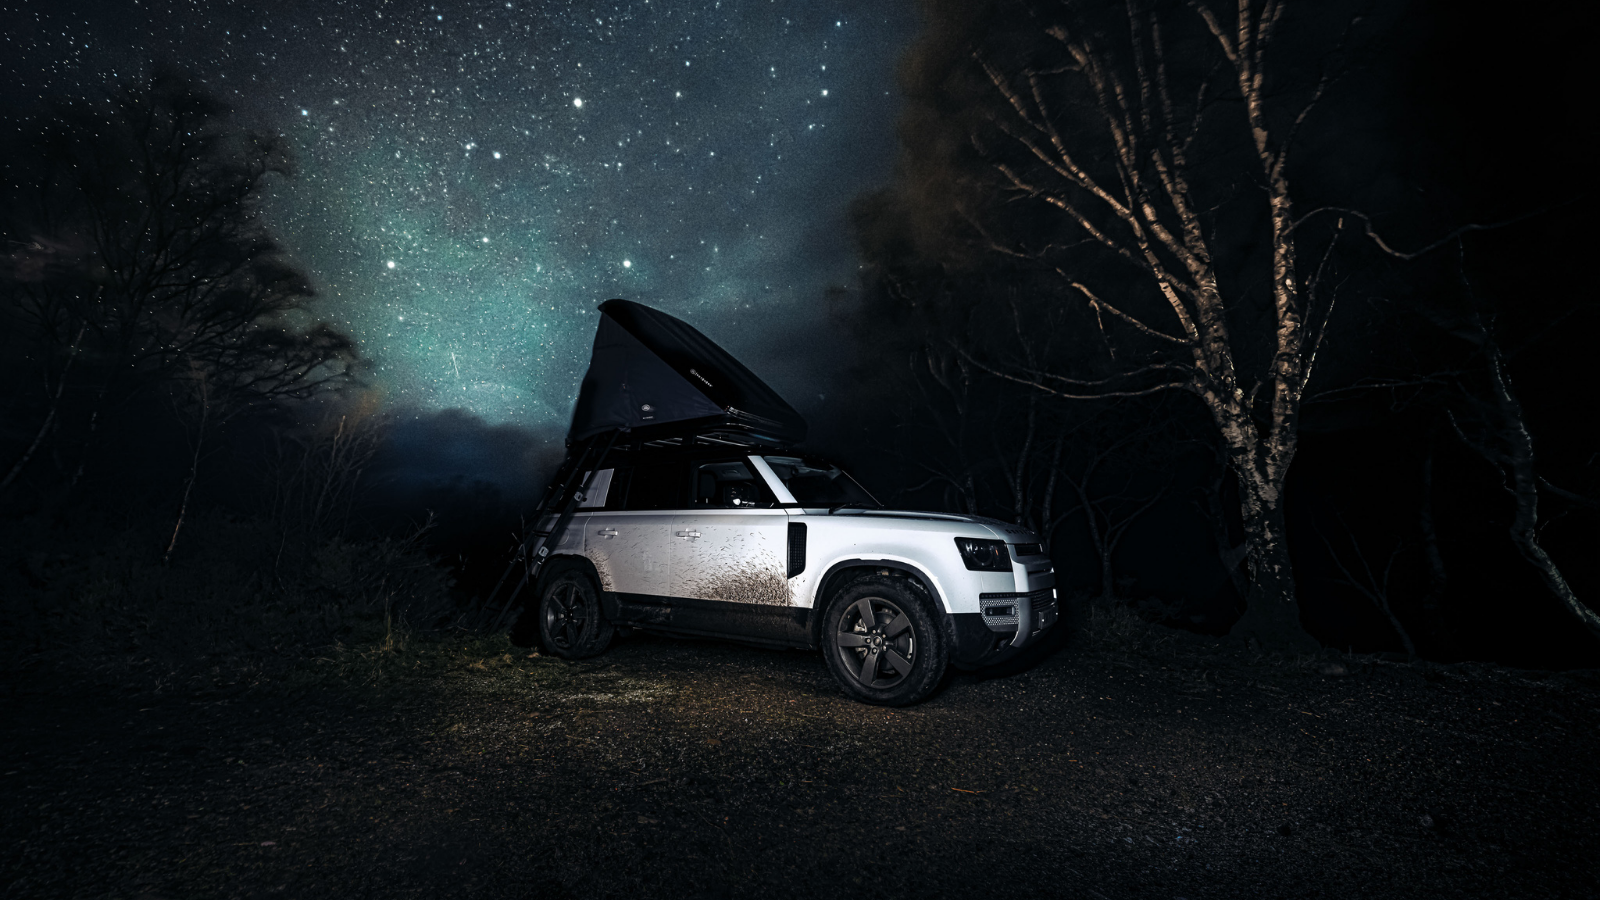 LAND ROVER REVEALS BEST UK STARGAZING SPOTS WITH THE HELP OF DARK SKY EXPERTS